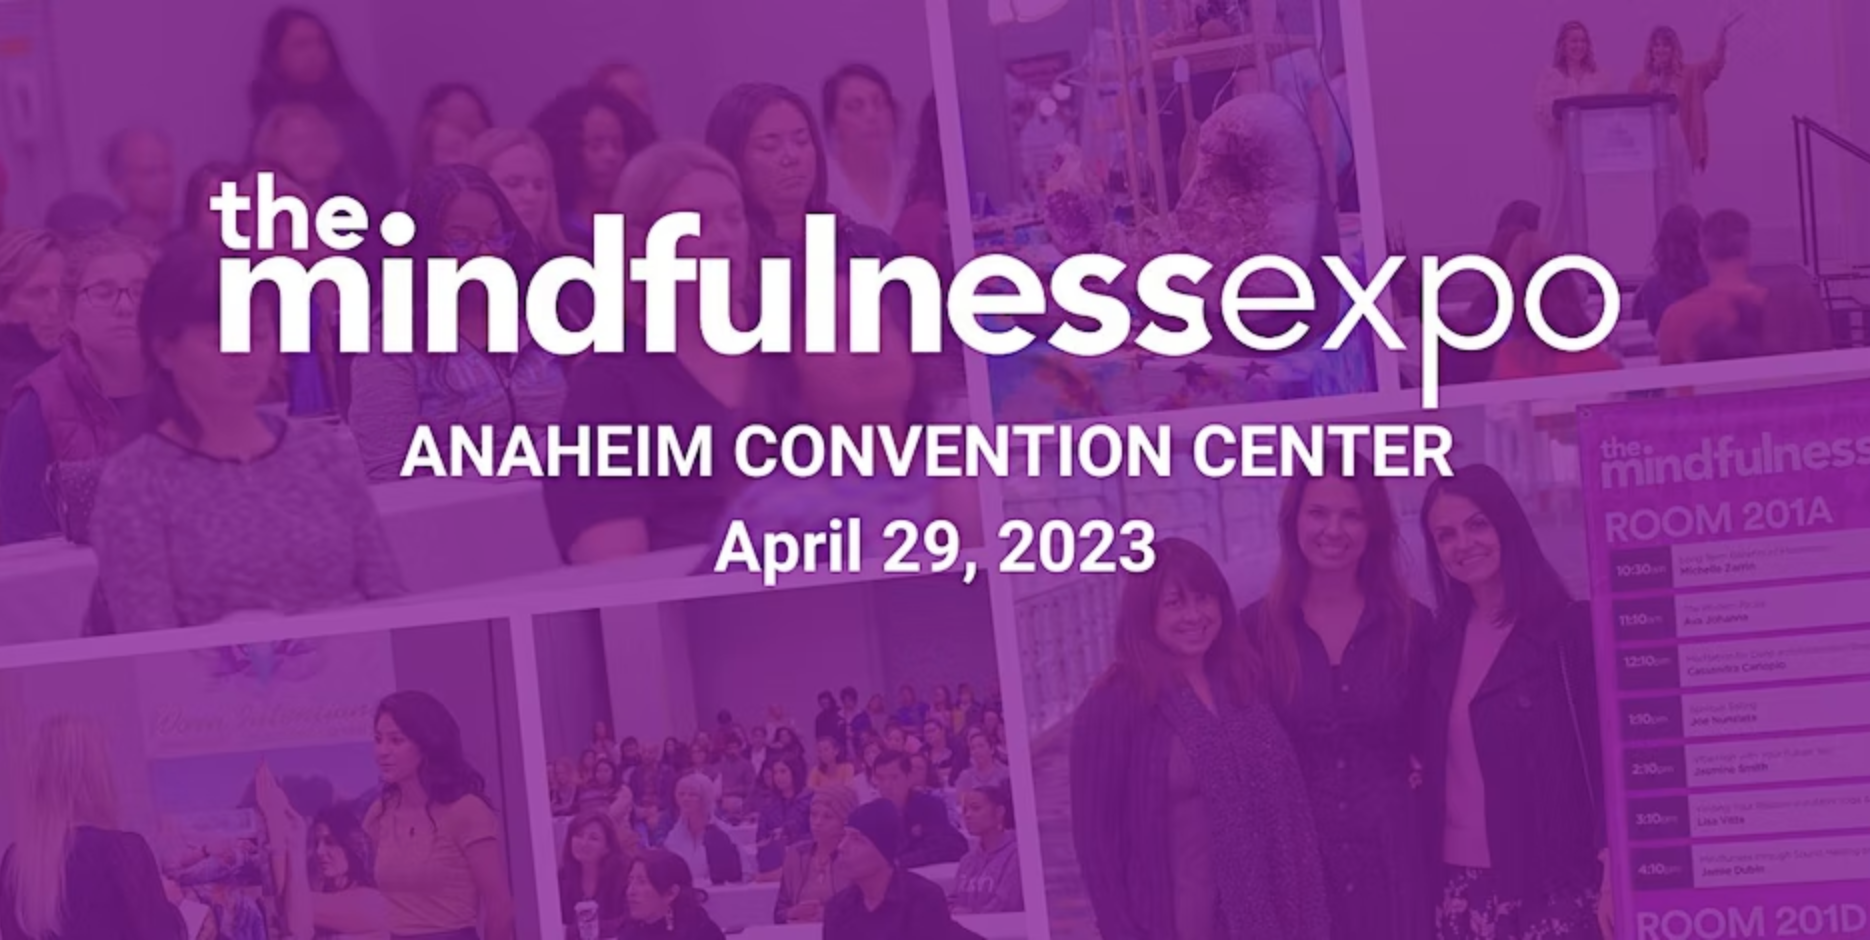 The Mindfulness Expo - April 23, 2023<br />
A one-day event with yoga classes, workshops and vendors all focusing on mindfulness and wellness.